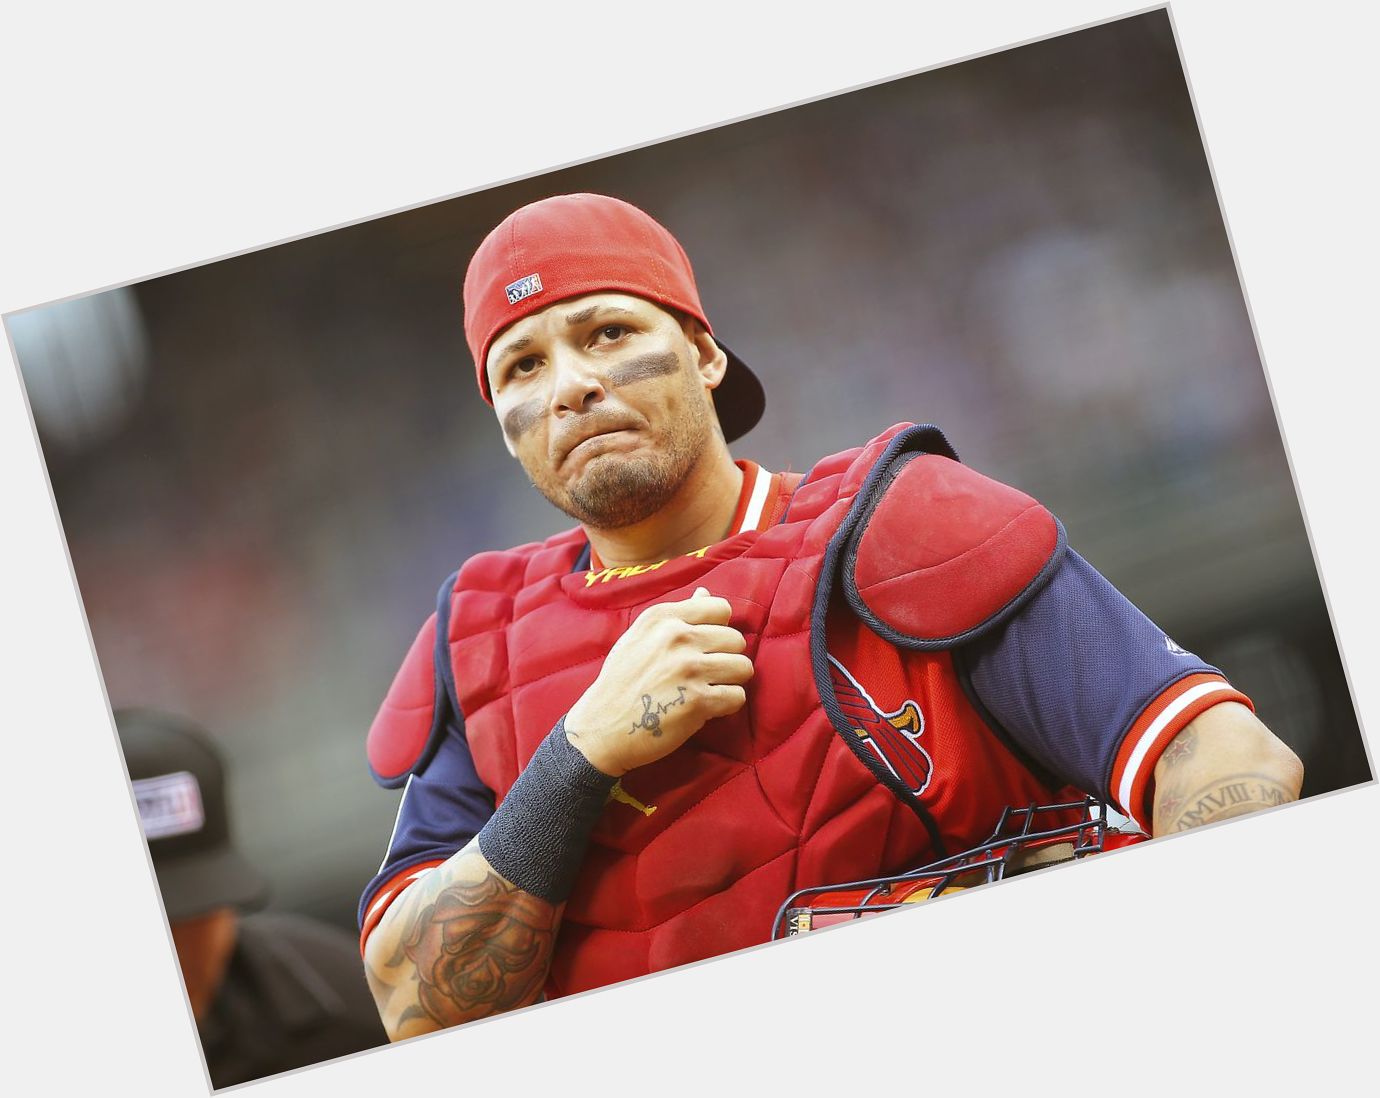 Happy 37th birthday to St Louis Cardinals catcher and future Hall of Famer Yadier Molina!  